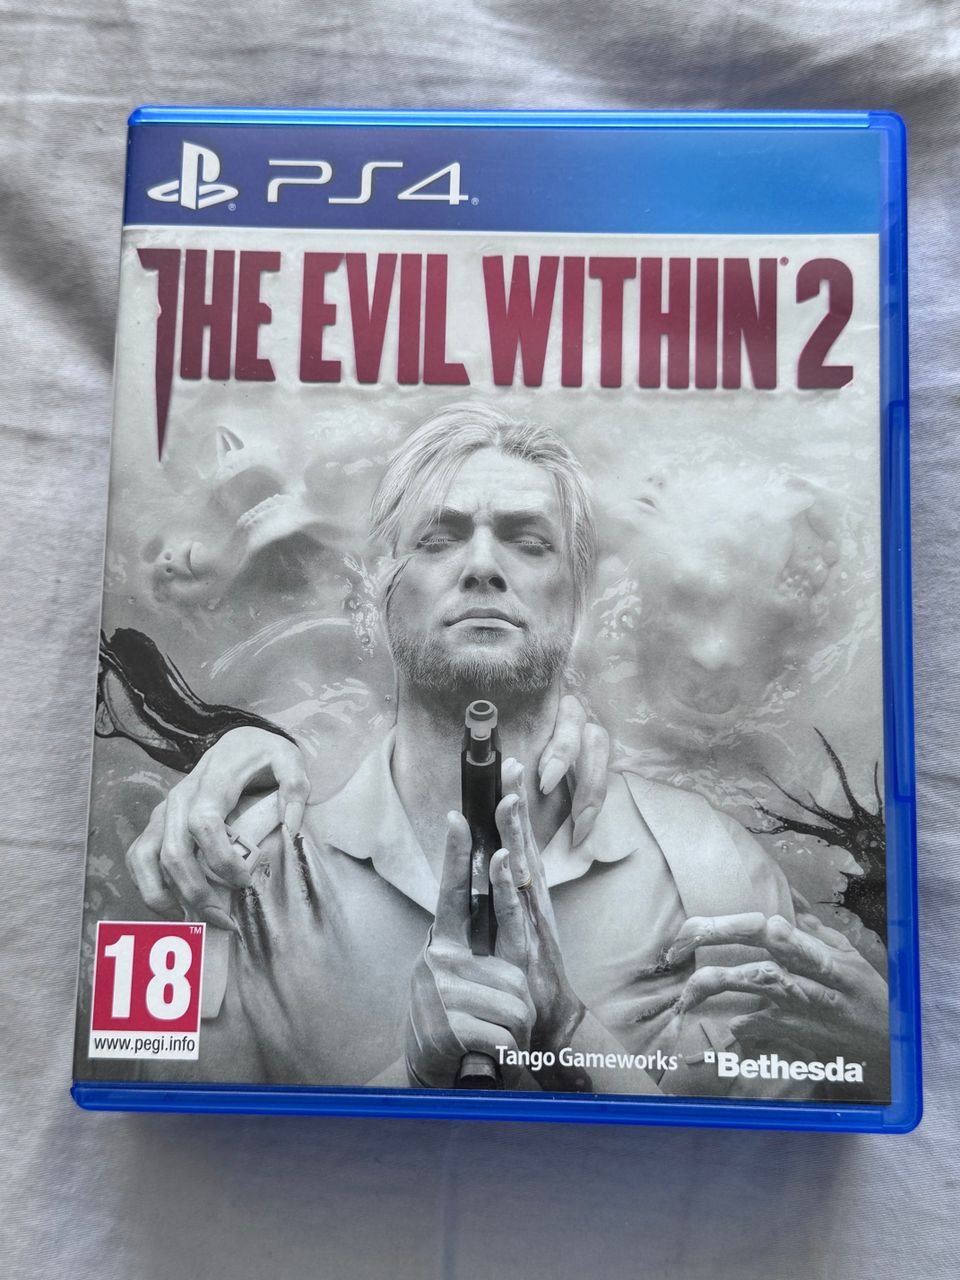 The evil within 2